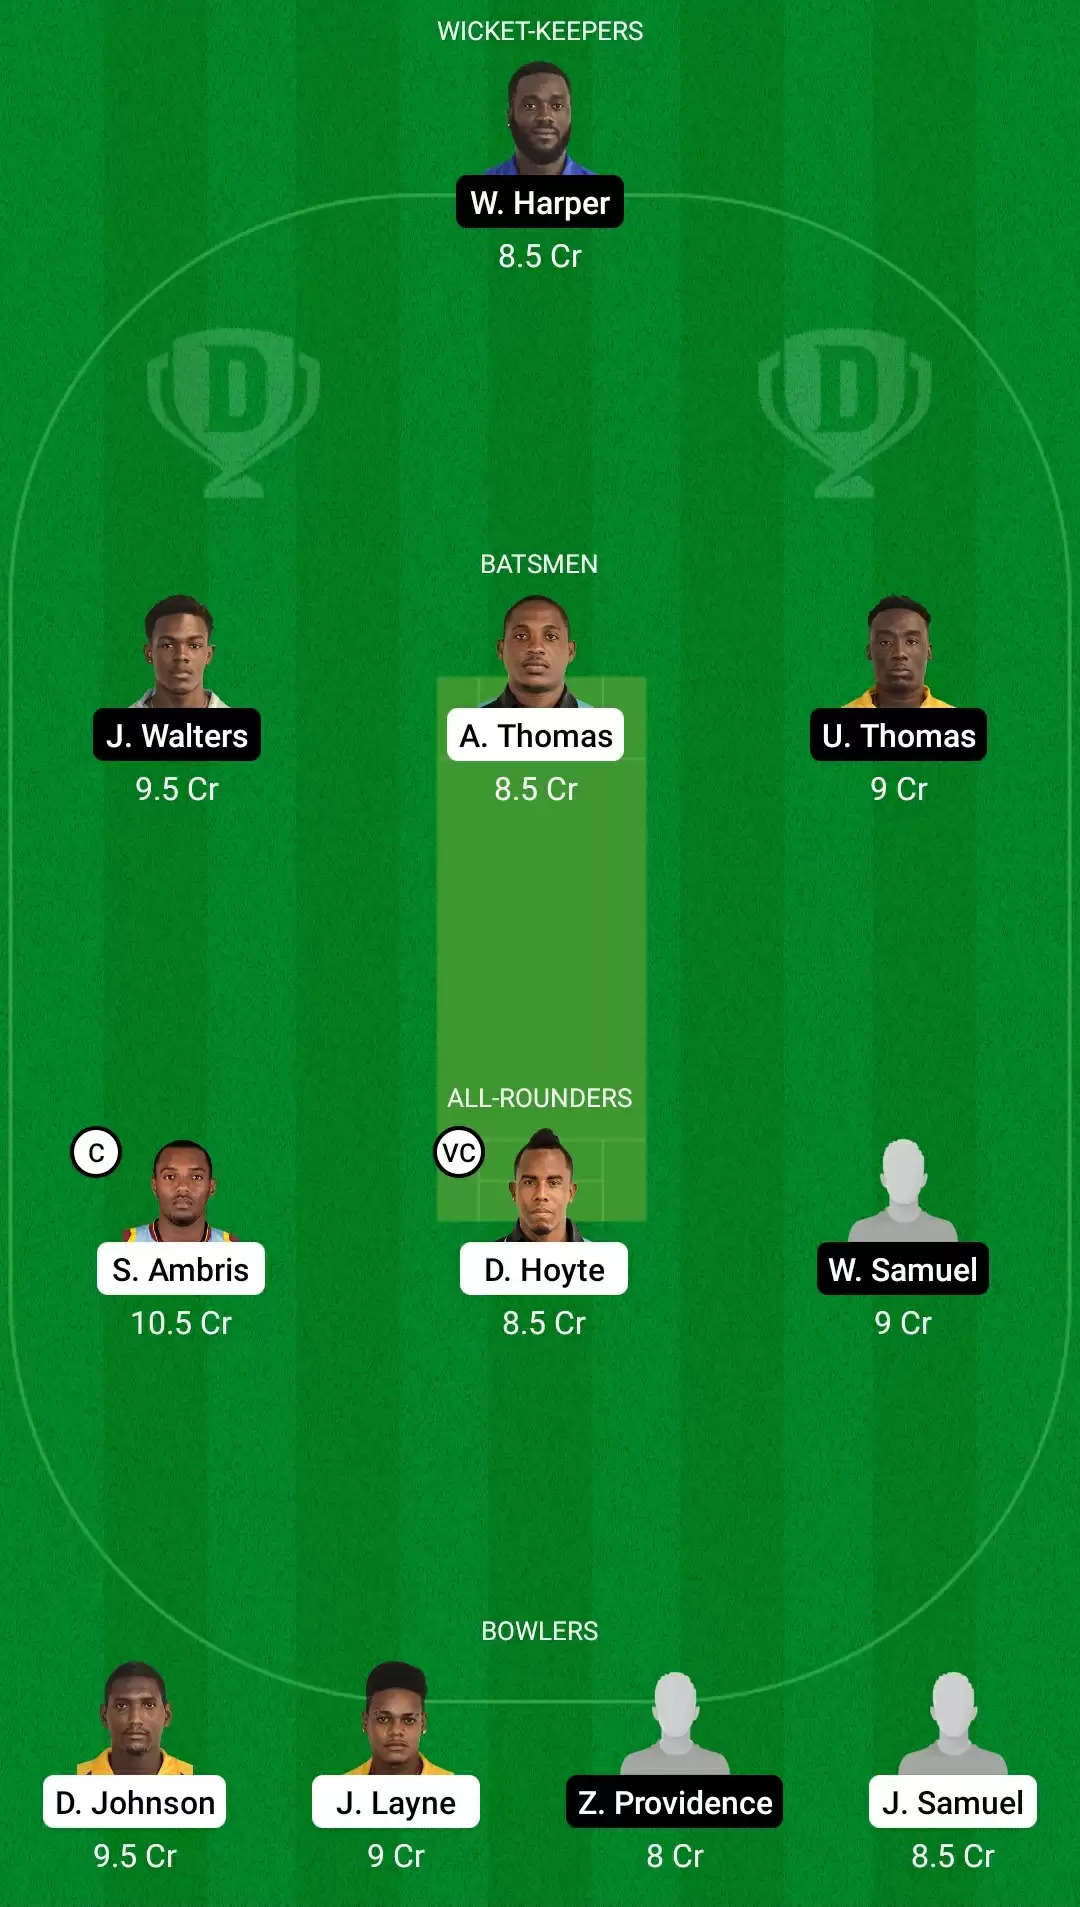 Vincy Premier League 2021, Match 19: SPB vs BGR Dream11 Prediction, Fantasy Cricket Tips, Team, Playing 11, Pitch Report, Weather Conditions and Injury Update